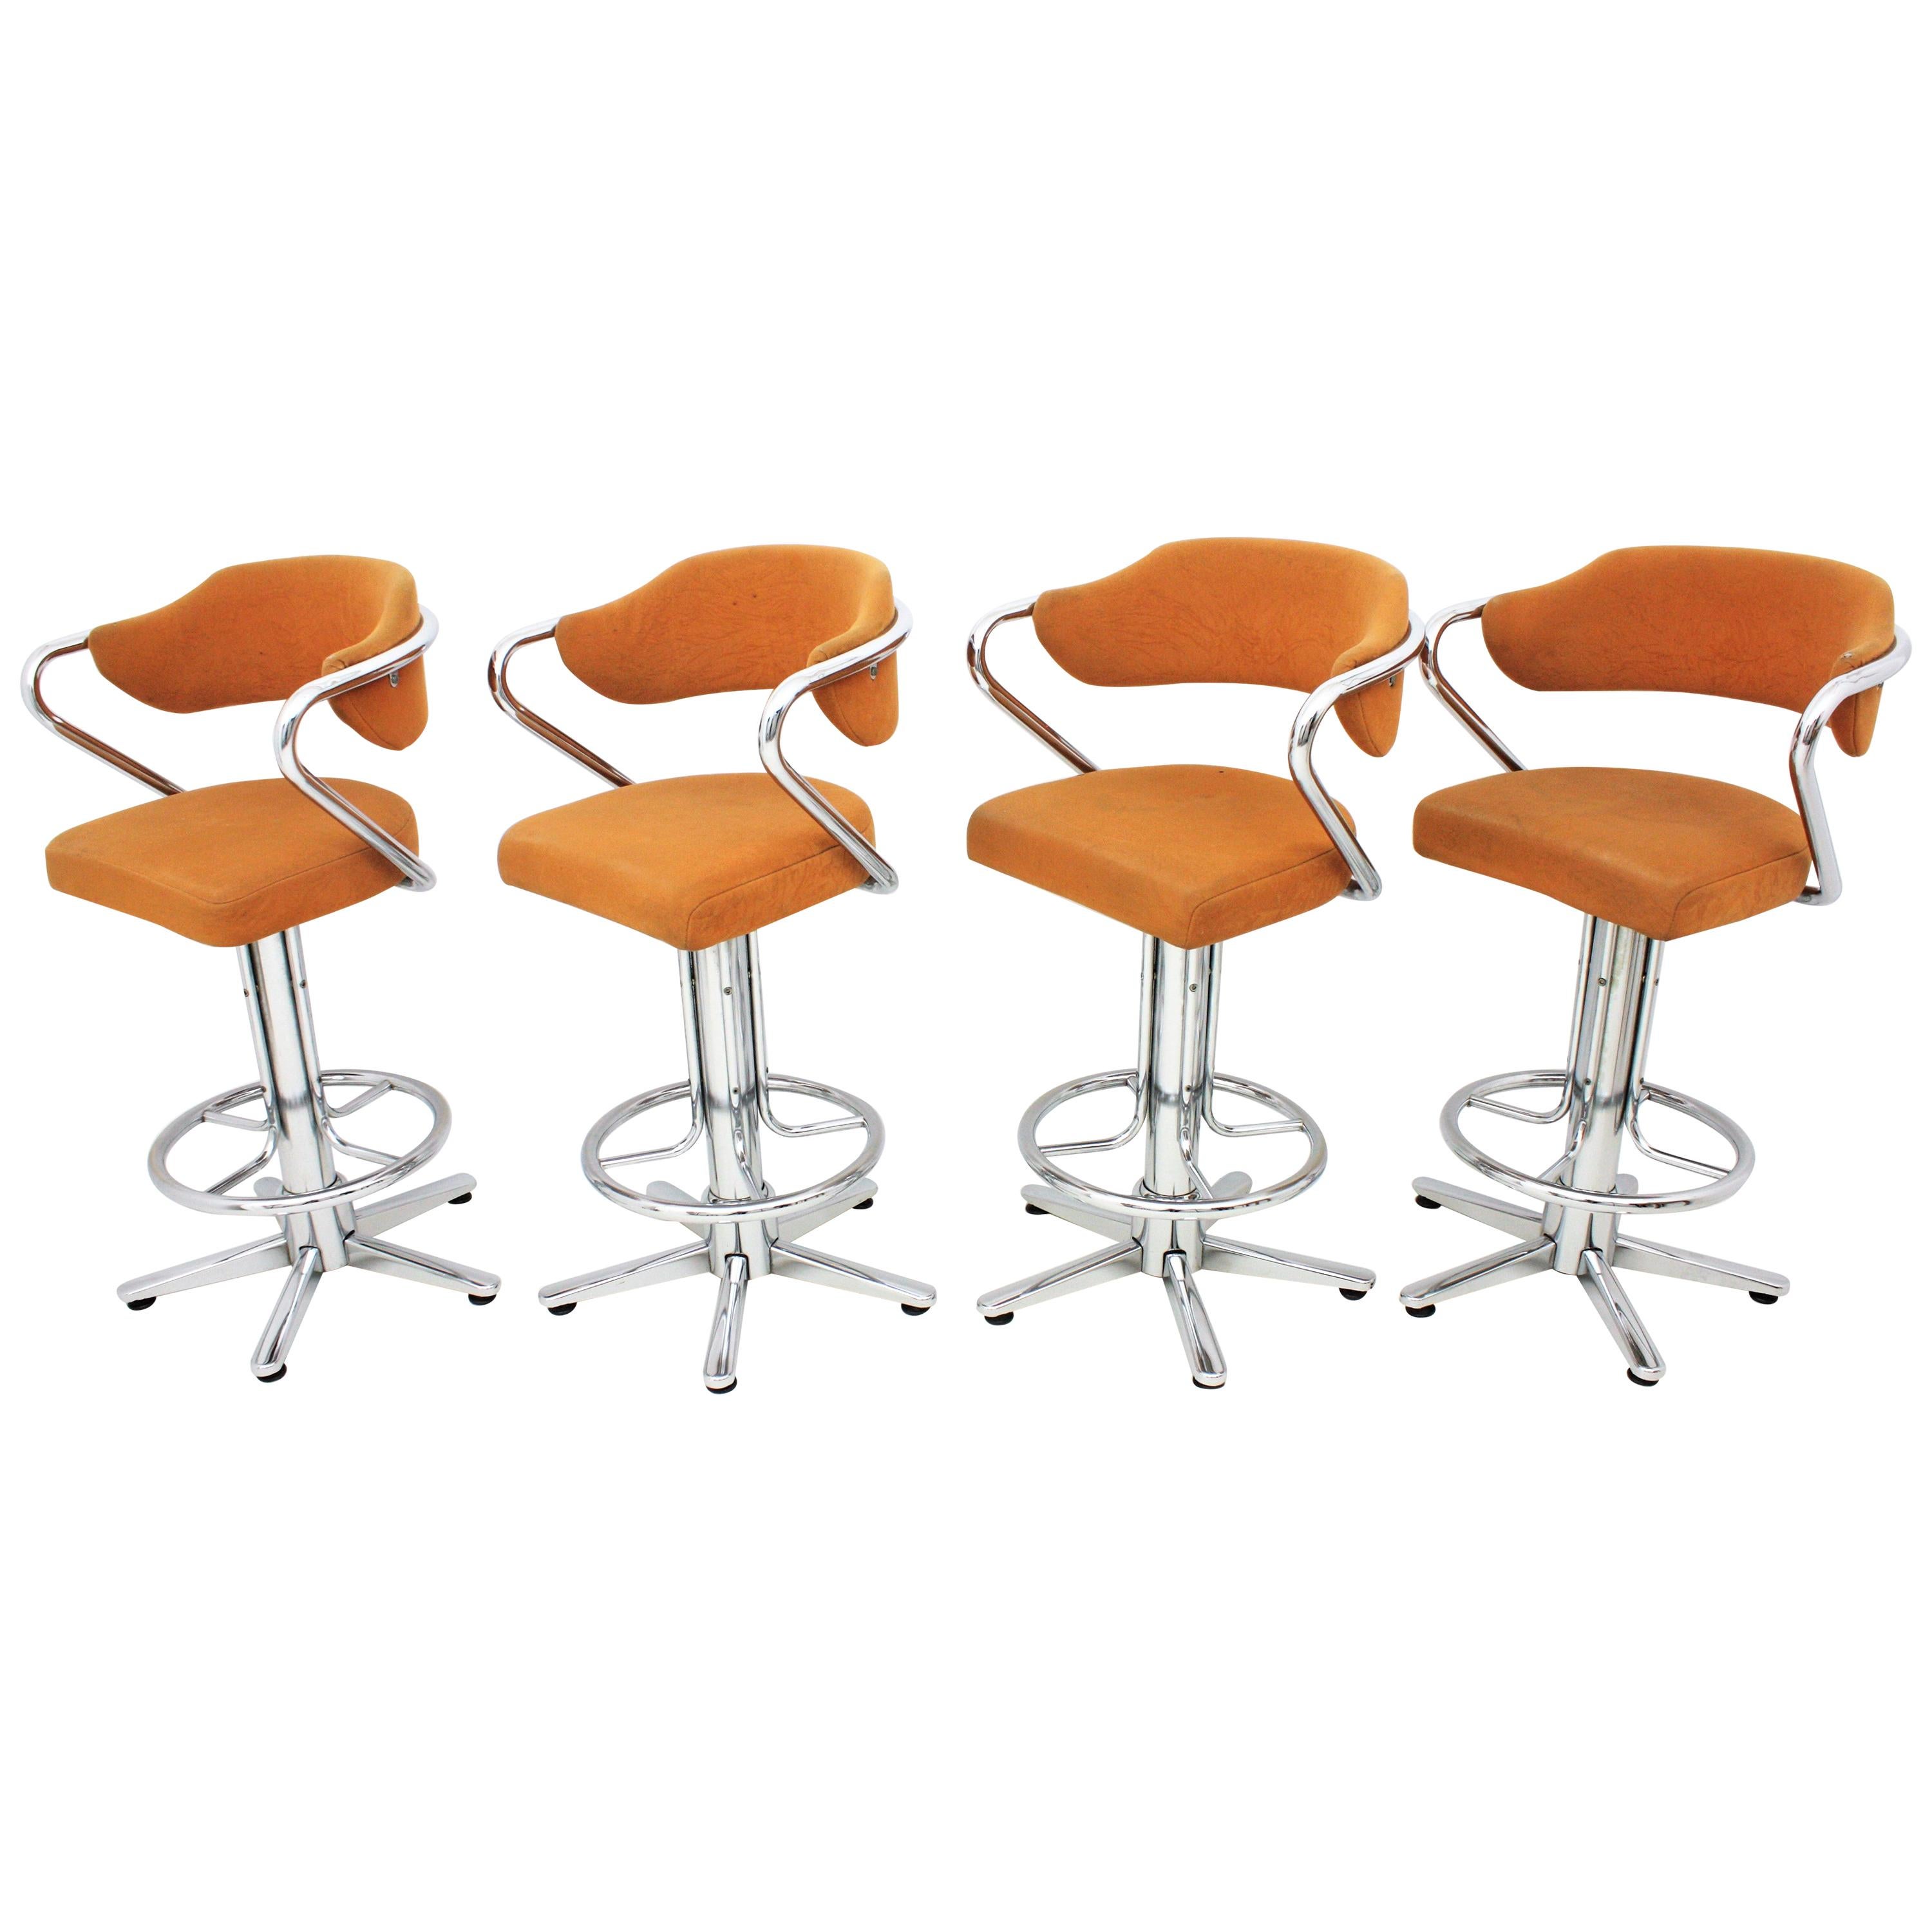 Set of Four Steel Swivel Bar Stools with Arms, Spain, 1970s